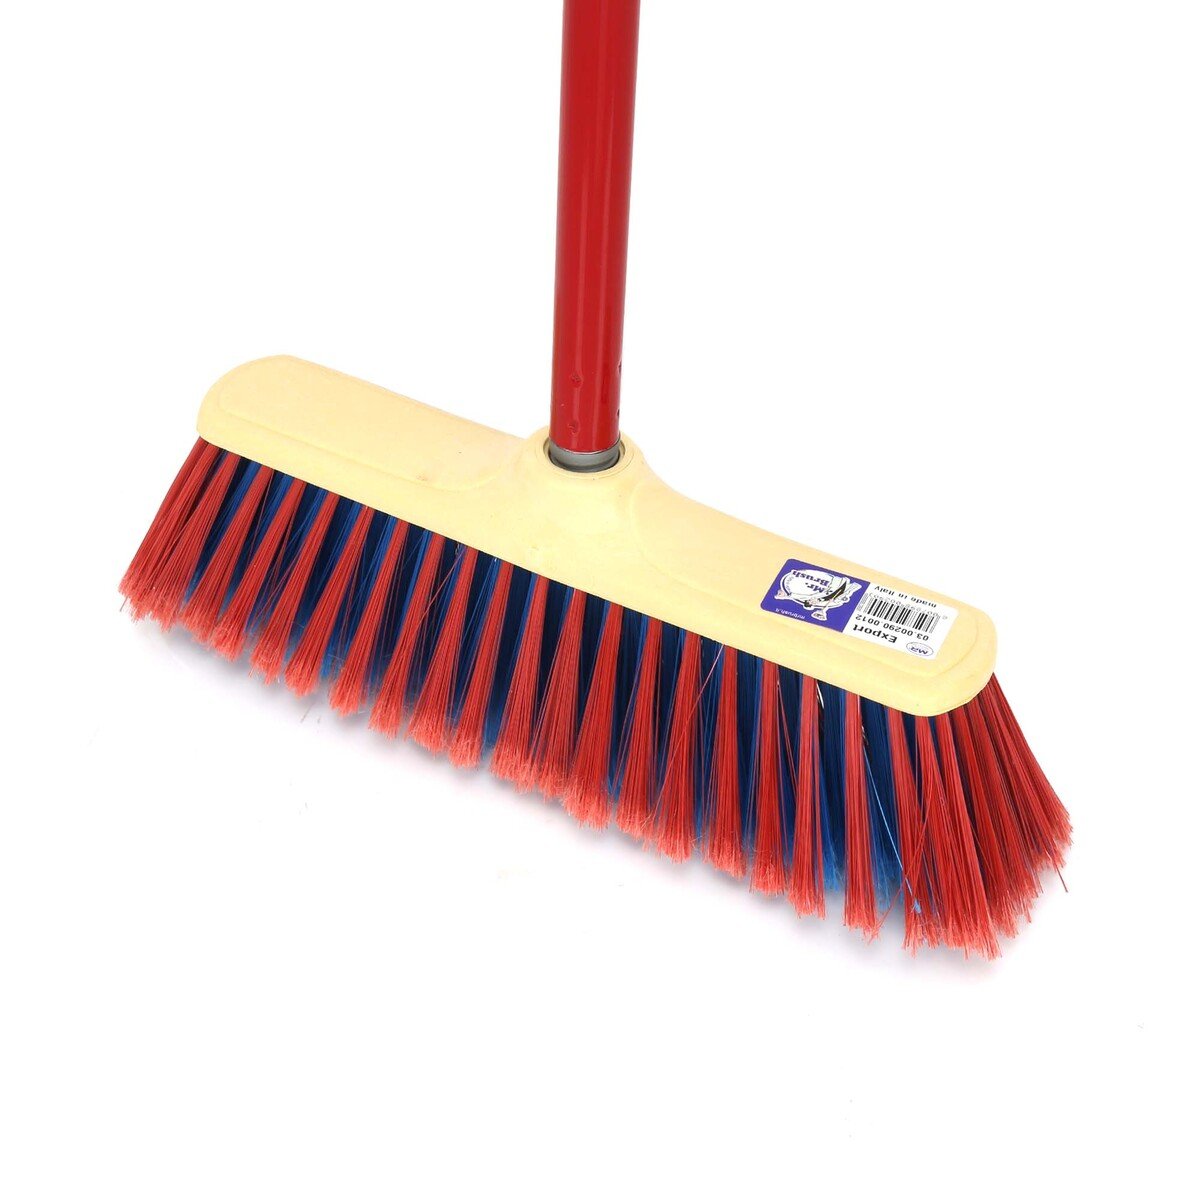 Mr.Brush 290.12 Export Soft Broom with long Stick, Assorted colors